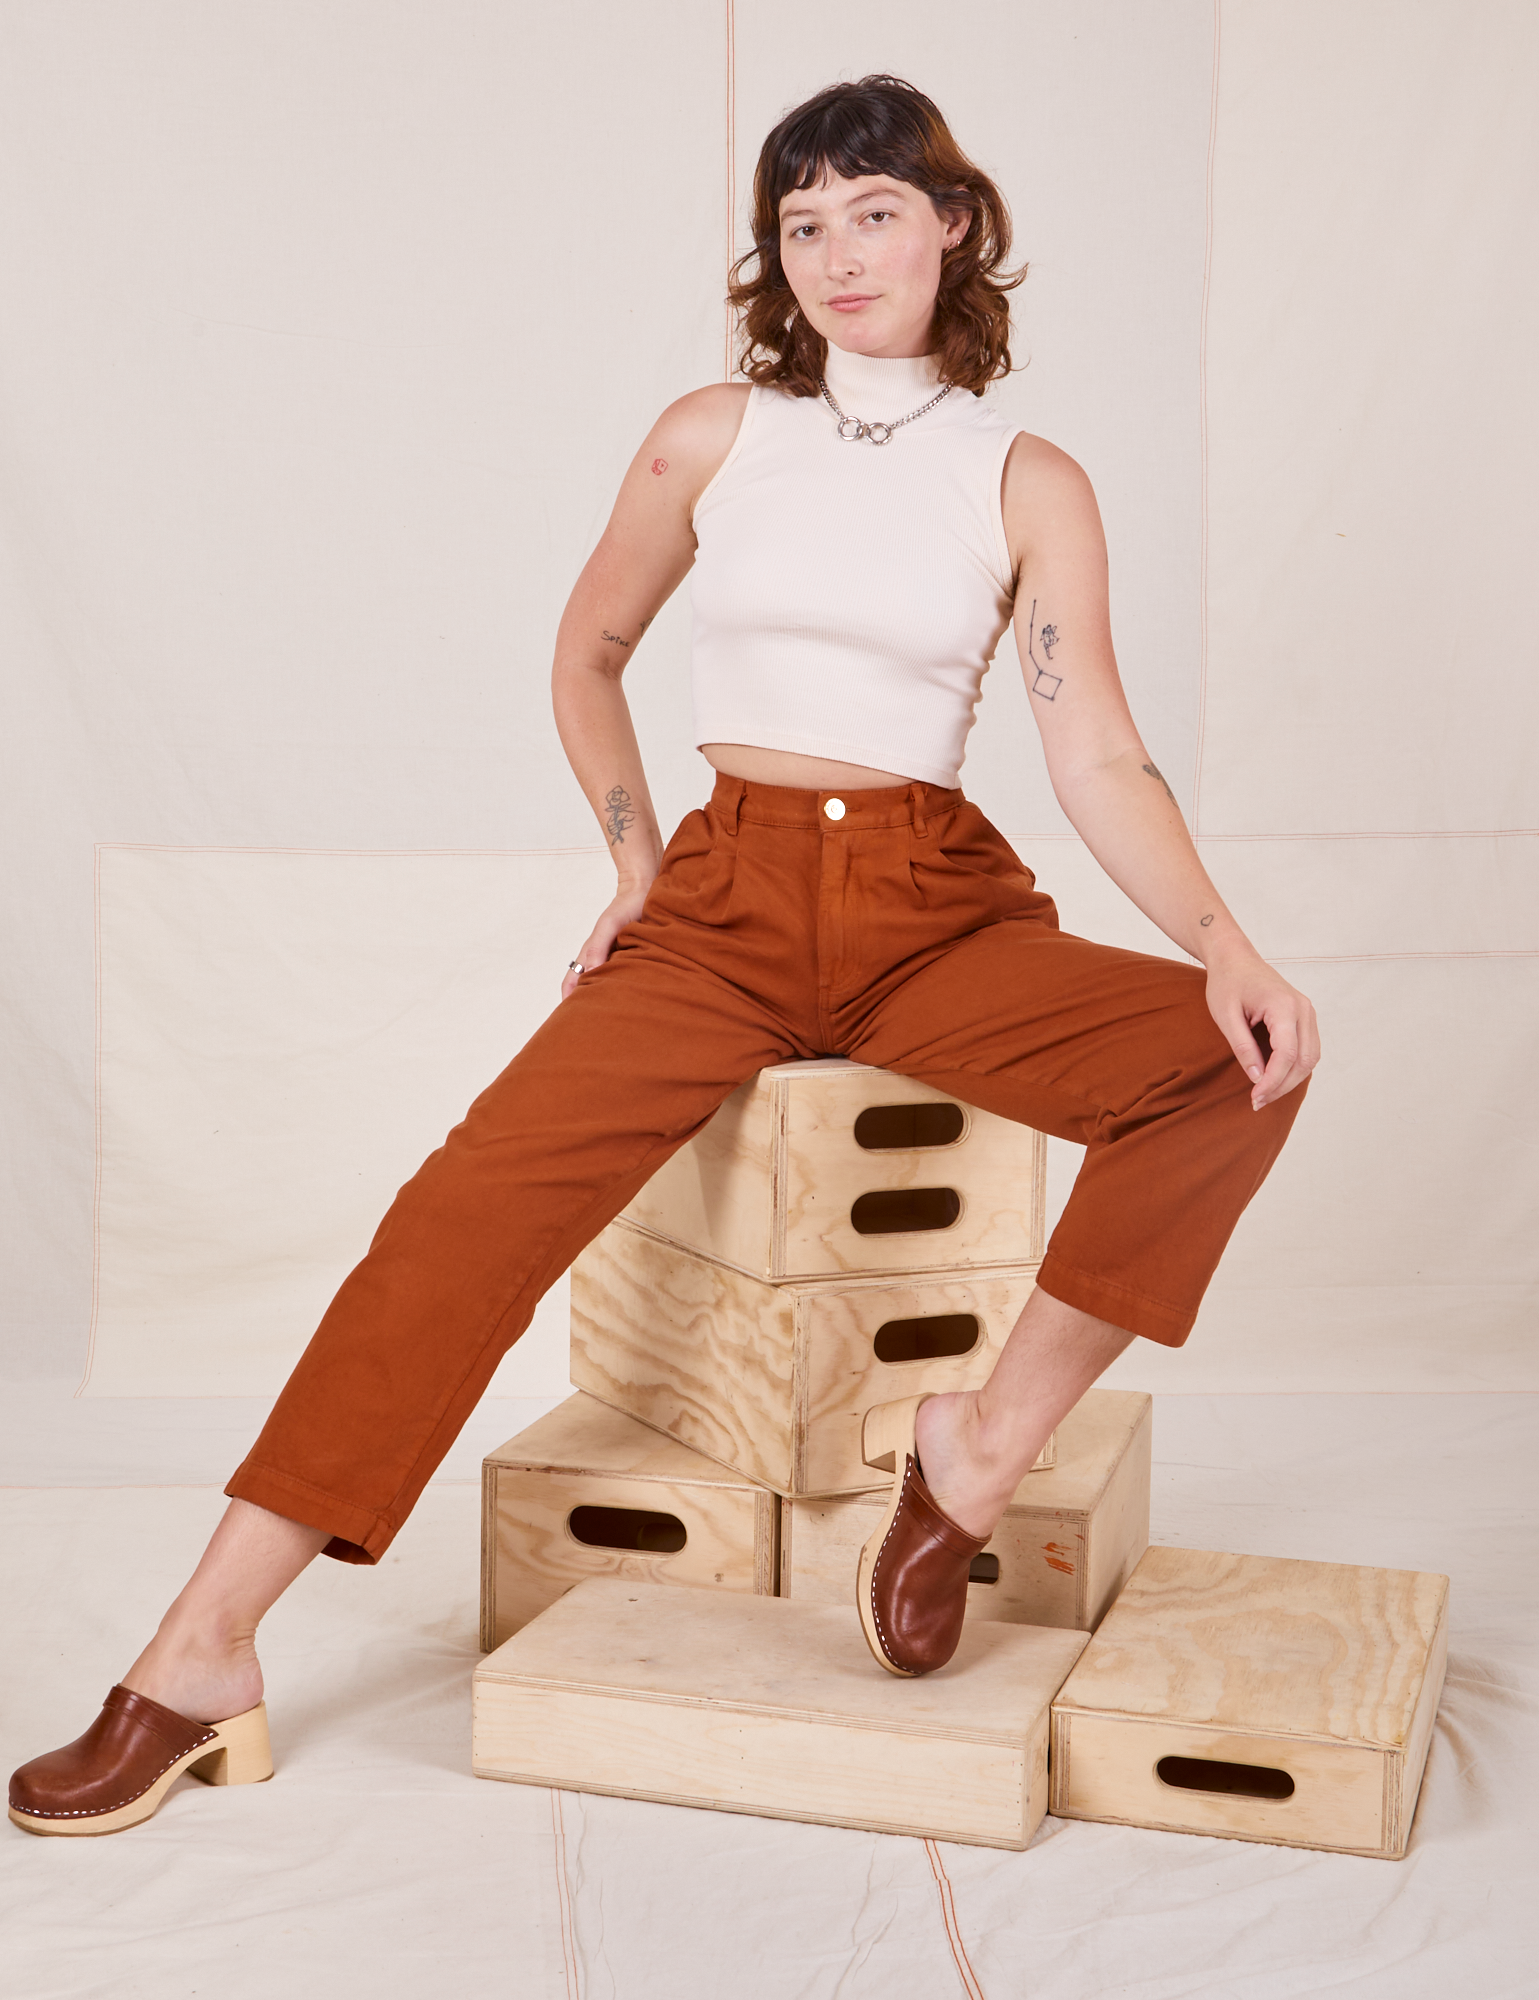 Alex is sitting on a stack of wooden crates. She is wearing Heavyweight Trousers in Burnt Terracotta and Sleeveless Turtleneck in vintage tee off-white